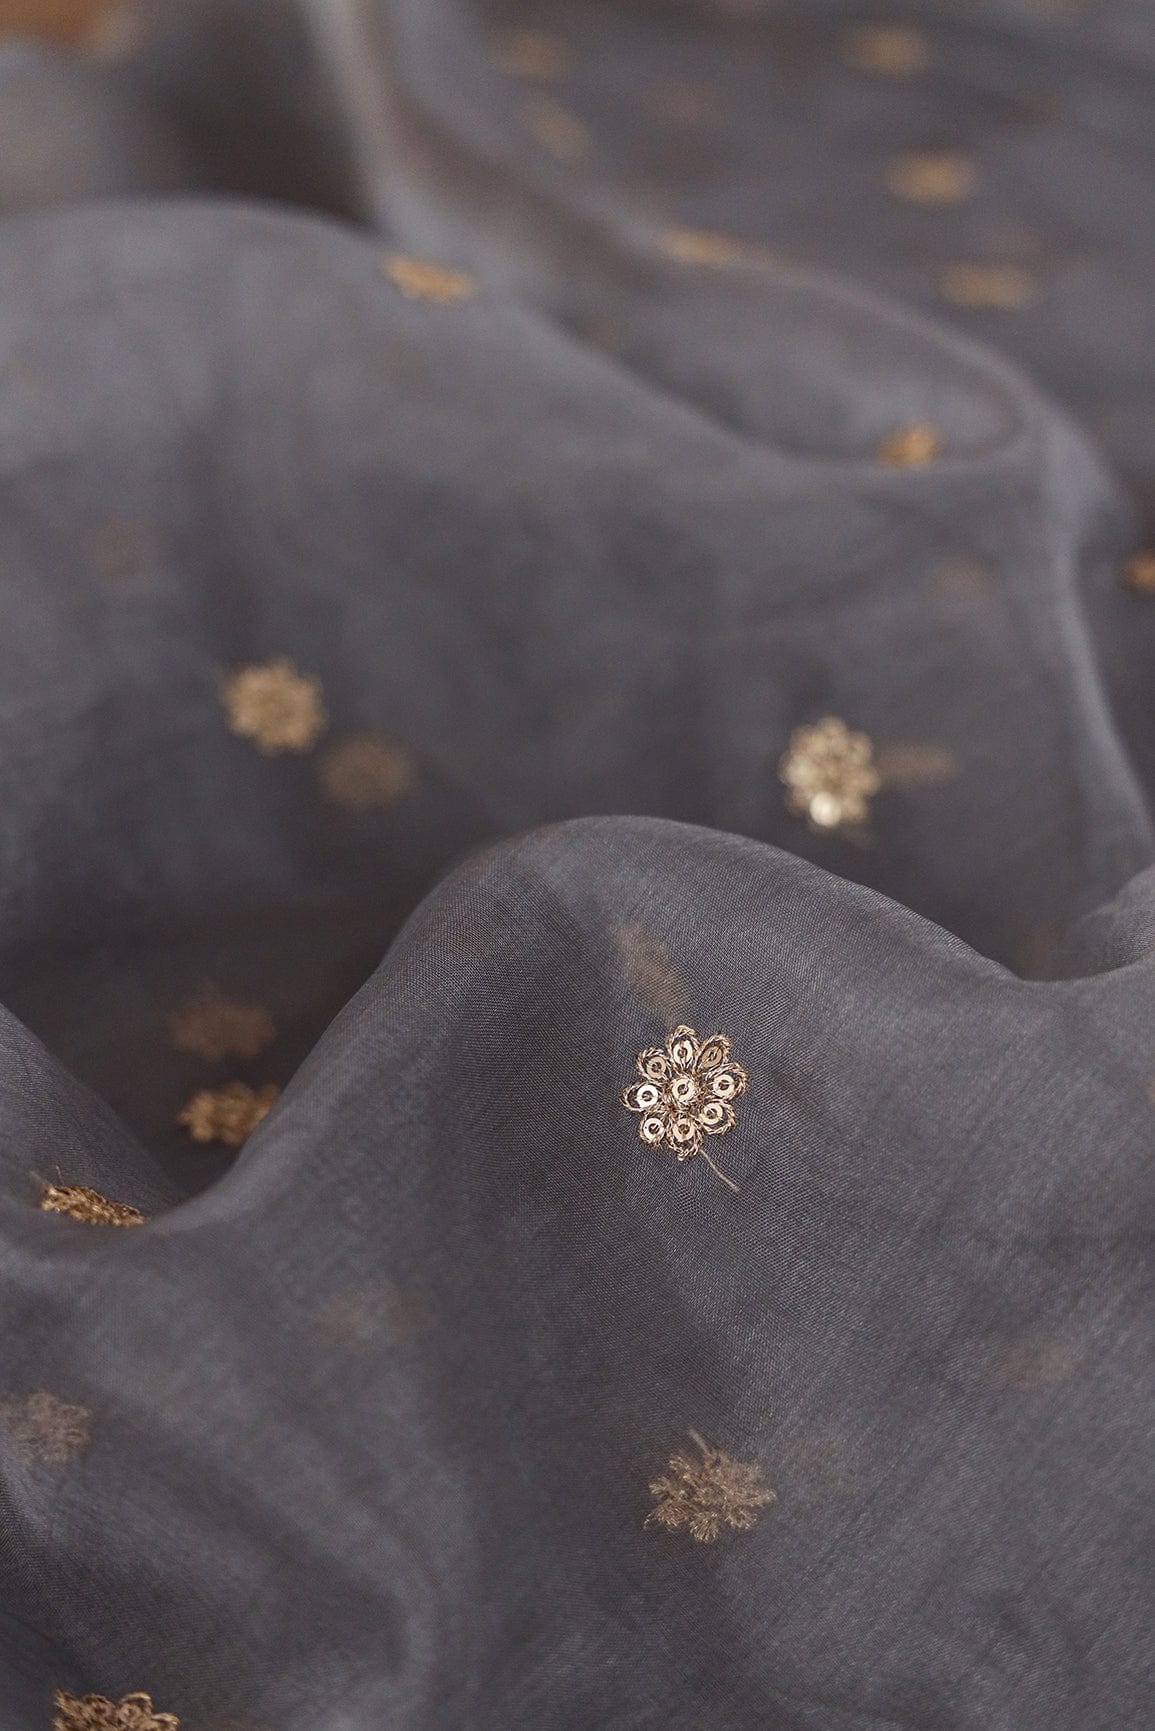 doeraa Embroidery Fabrics Gold Sequins with Zari Embroidery on Grey Organza Fabric